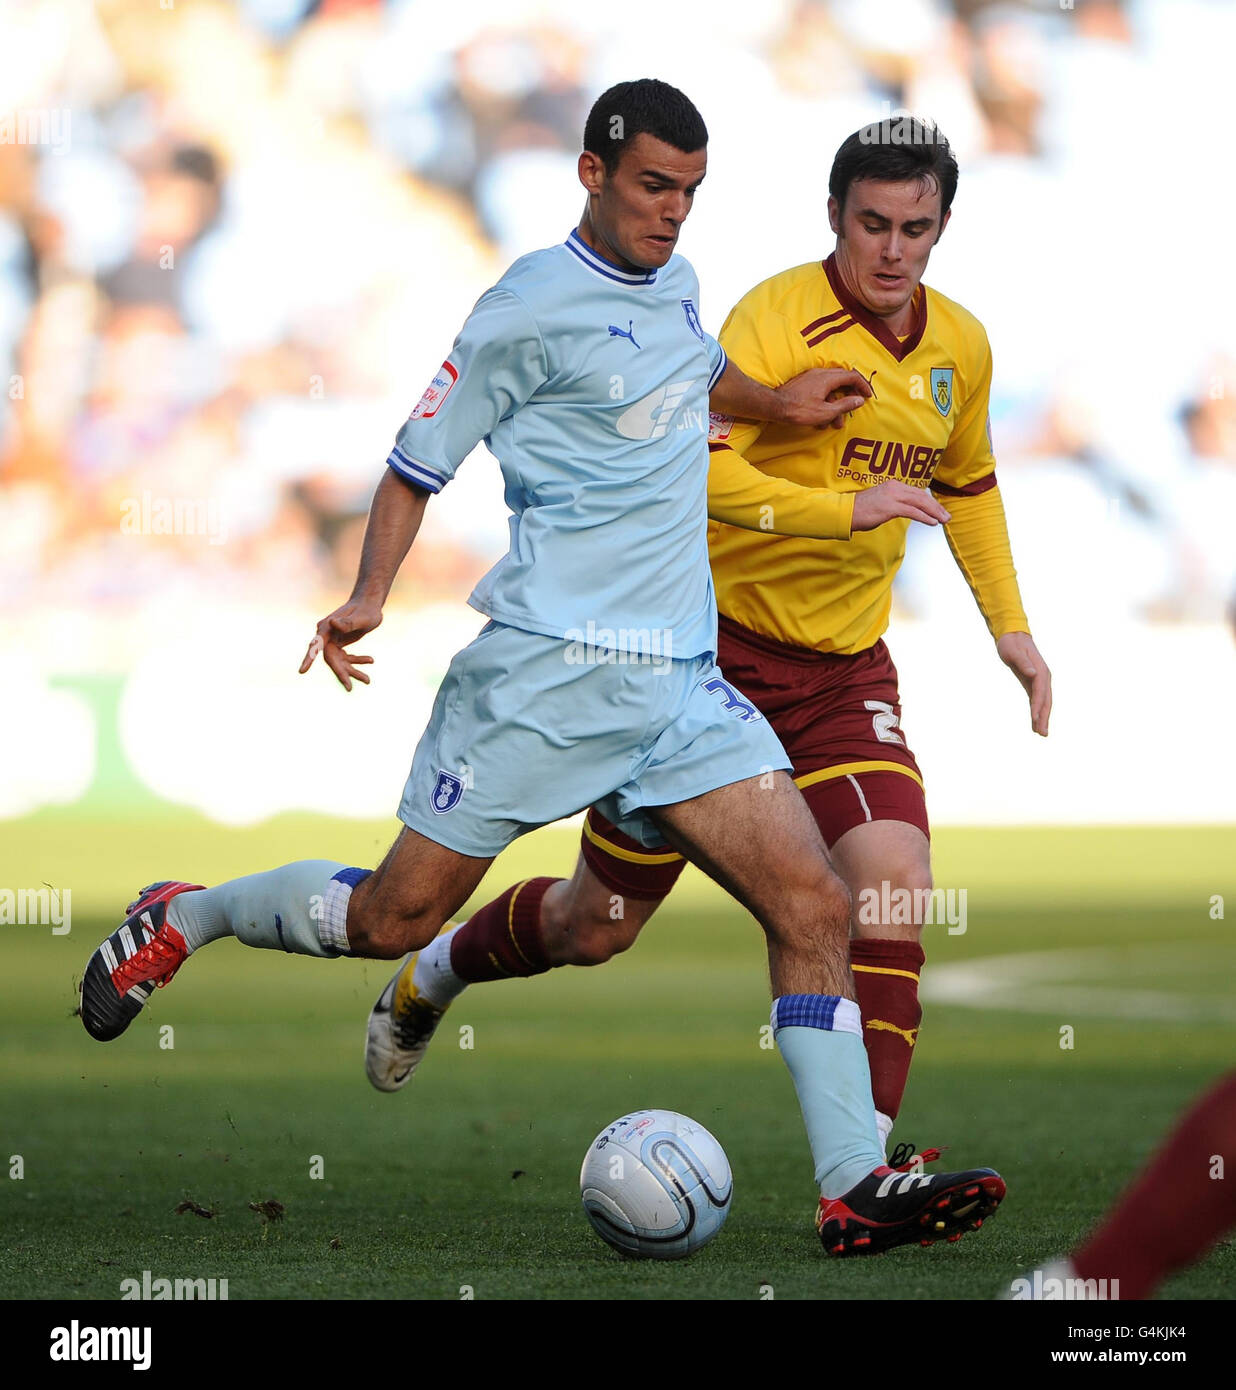 Coventry City's Conor Thomas and Burnley's Keith Treacy (right) in action during the npower Football League Championship match at the Ricoh Arena, Coventry. Stock Photo